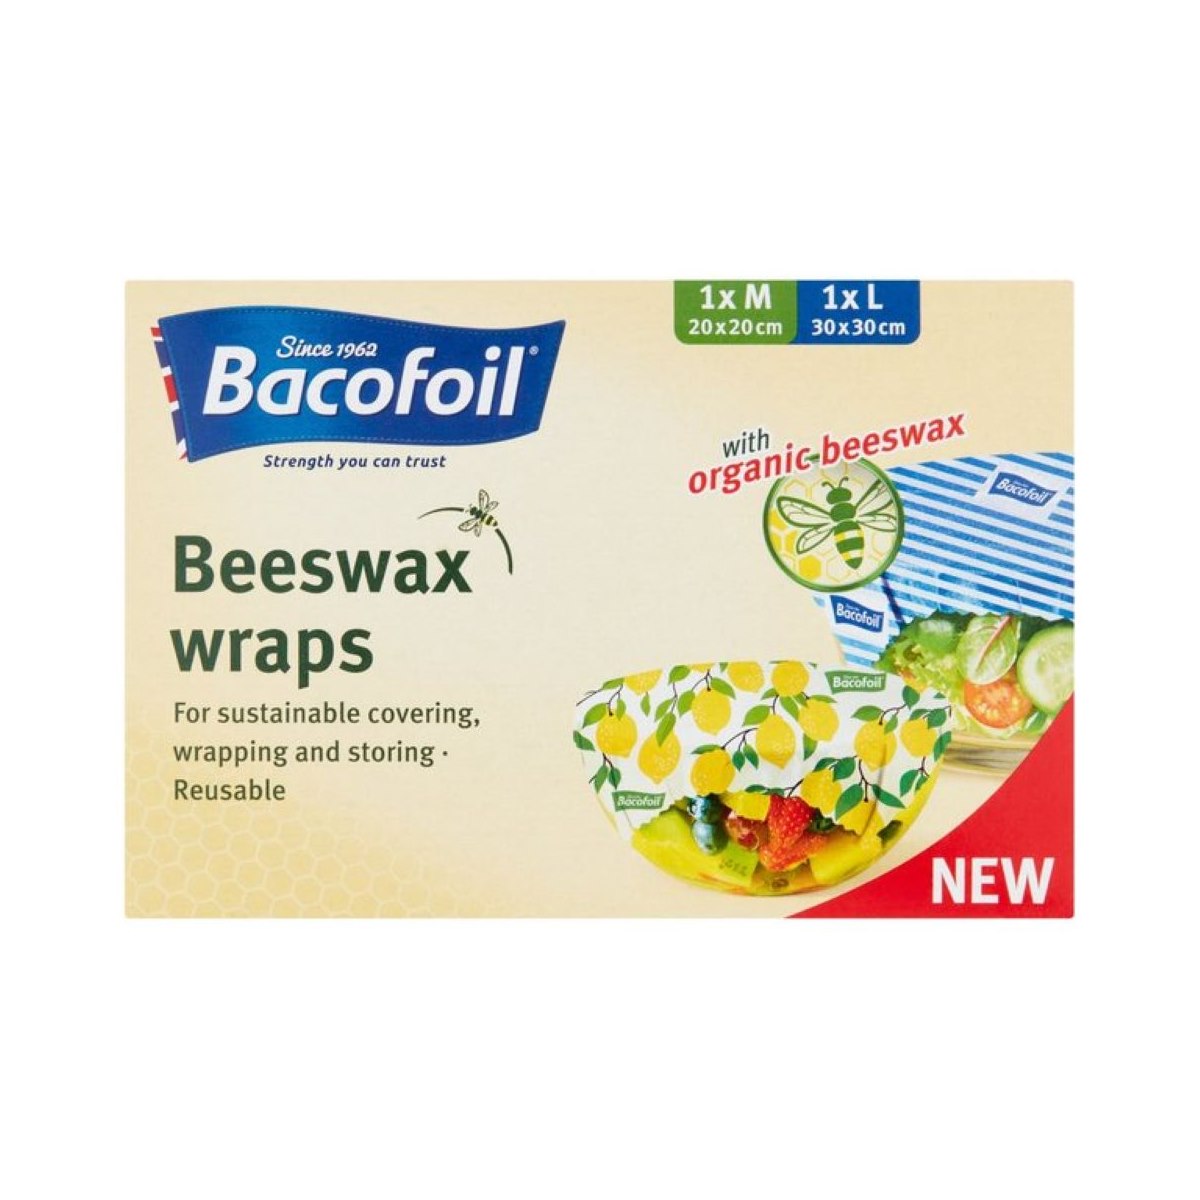 Bacofoil Beeswax Wraps